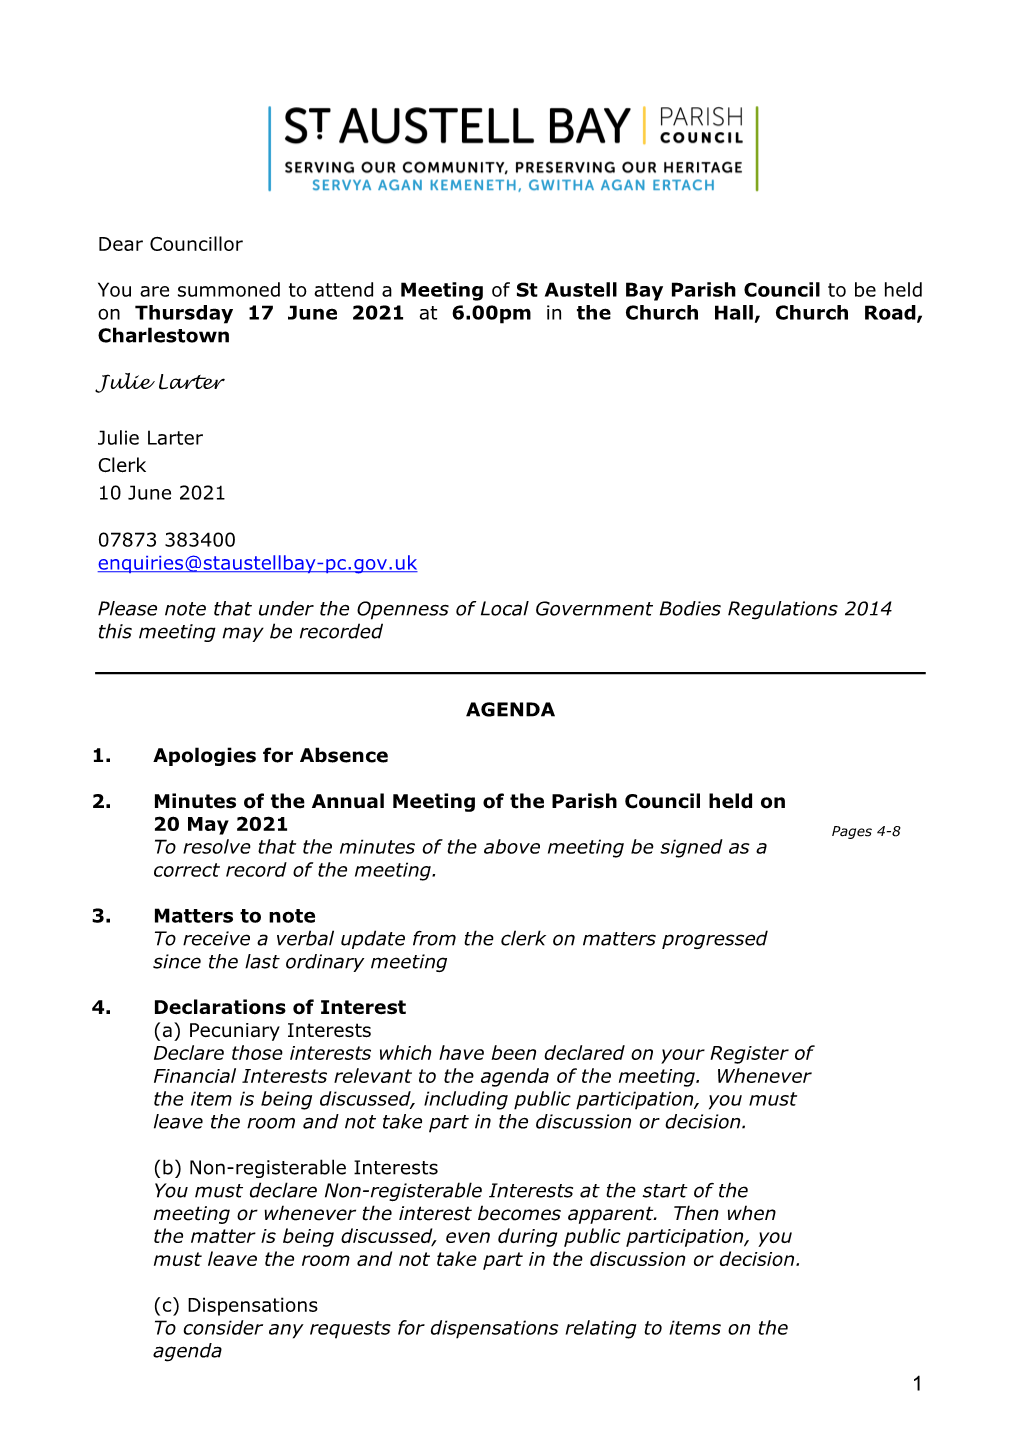 Dear Councillor You Are Summoned to Attend a Meeting of St Austell Bay Parish Council to Be Held on Thursday 17 June 2021 At